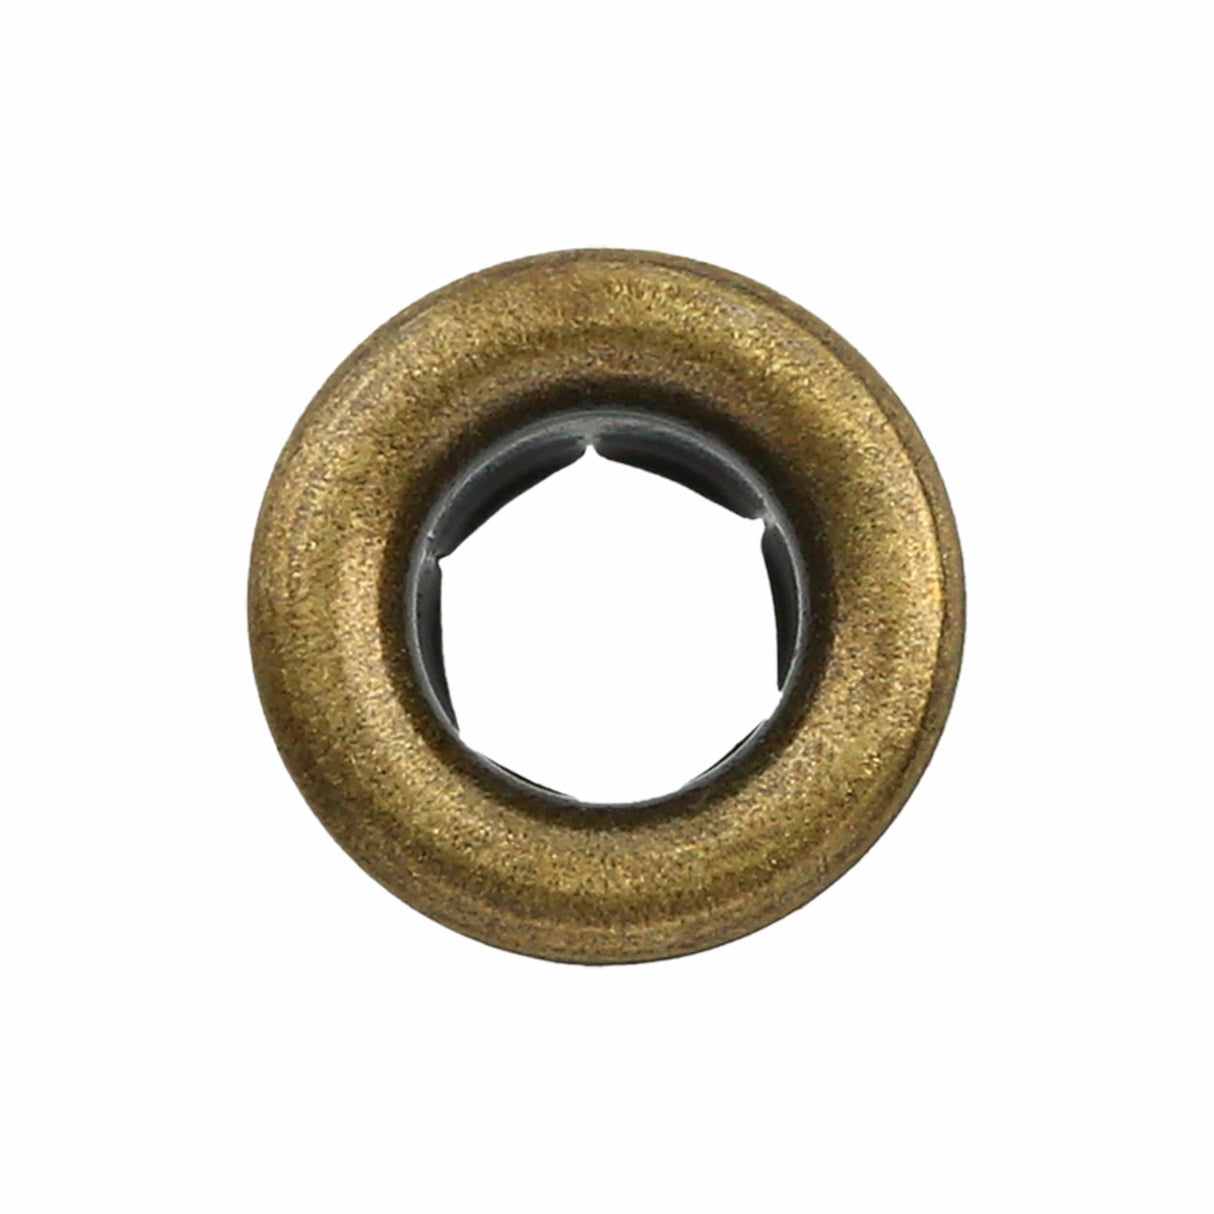 Ohio Travel Bag Fasteners 5/32" Antique Brass, Eyelet, Steel - 12 pk, #A-344-ANTB A-344-ANTB